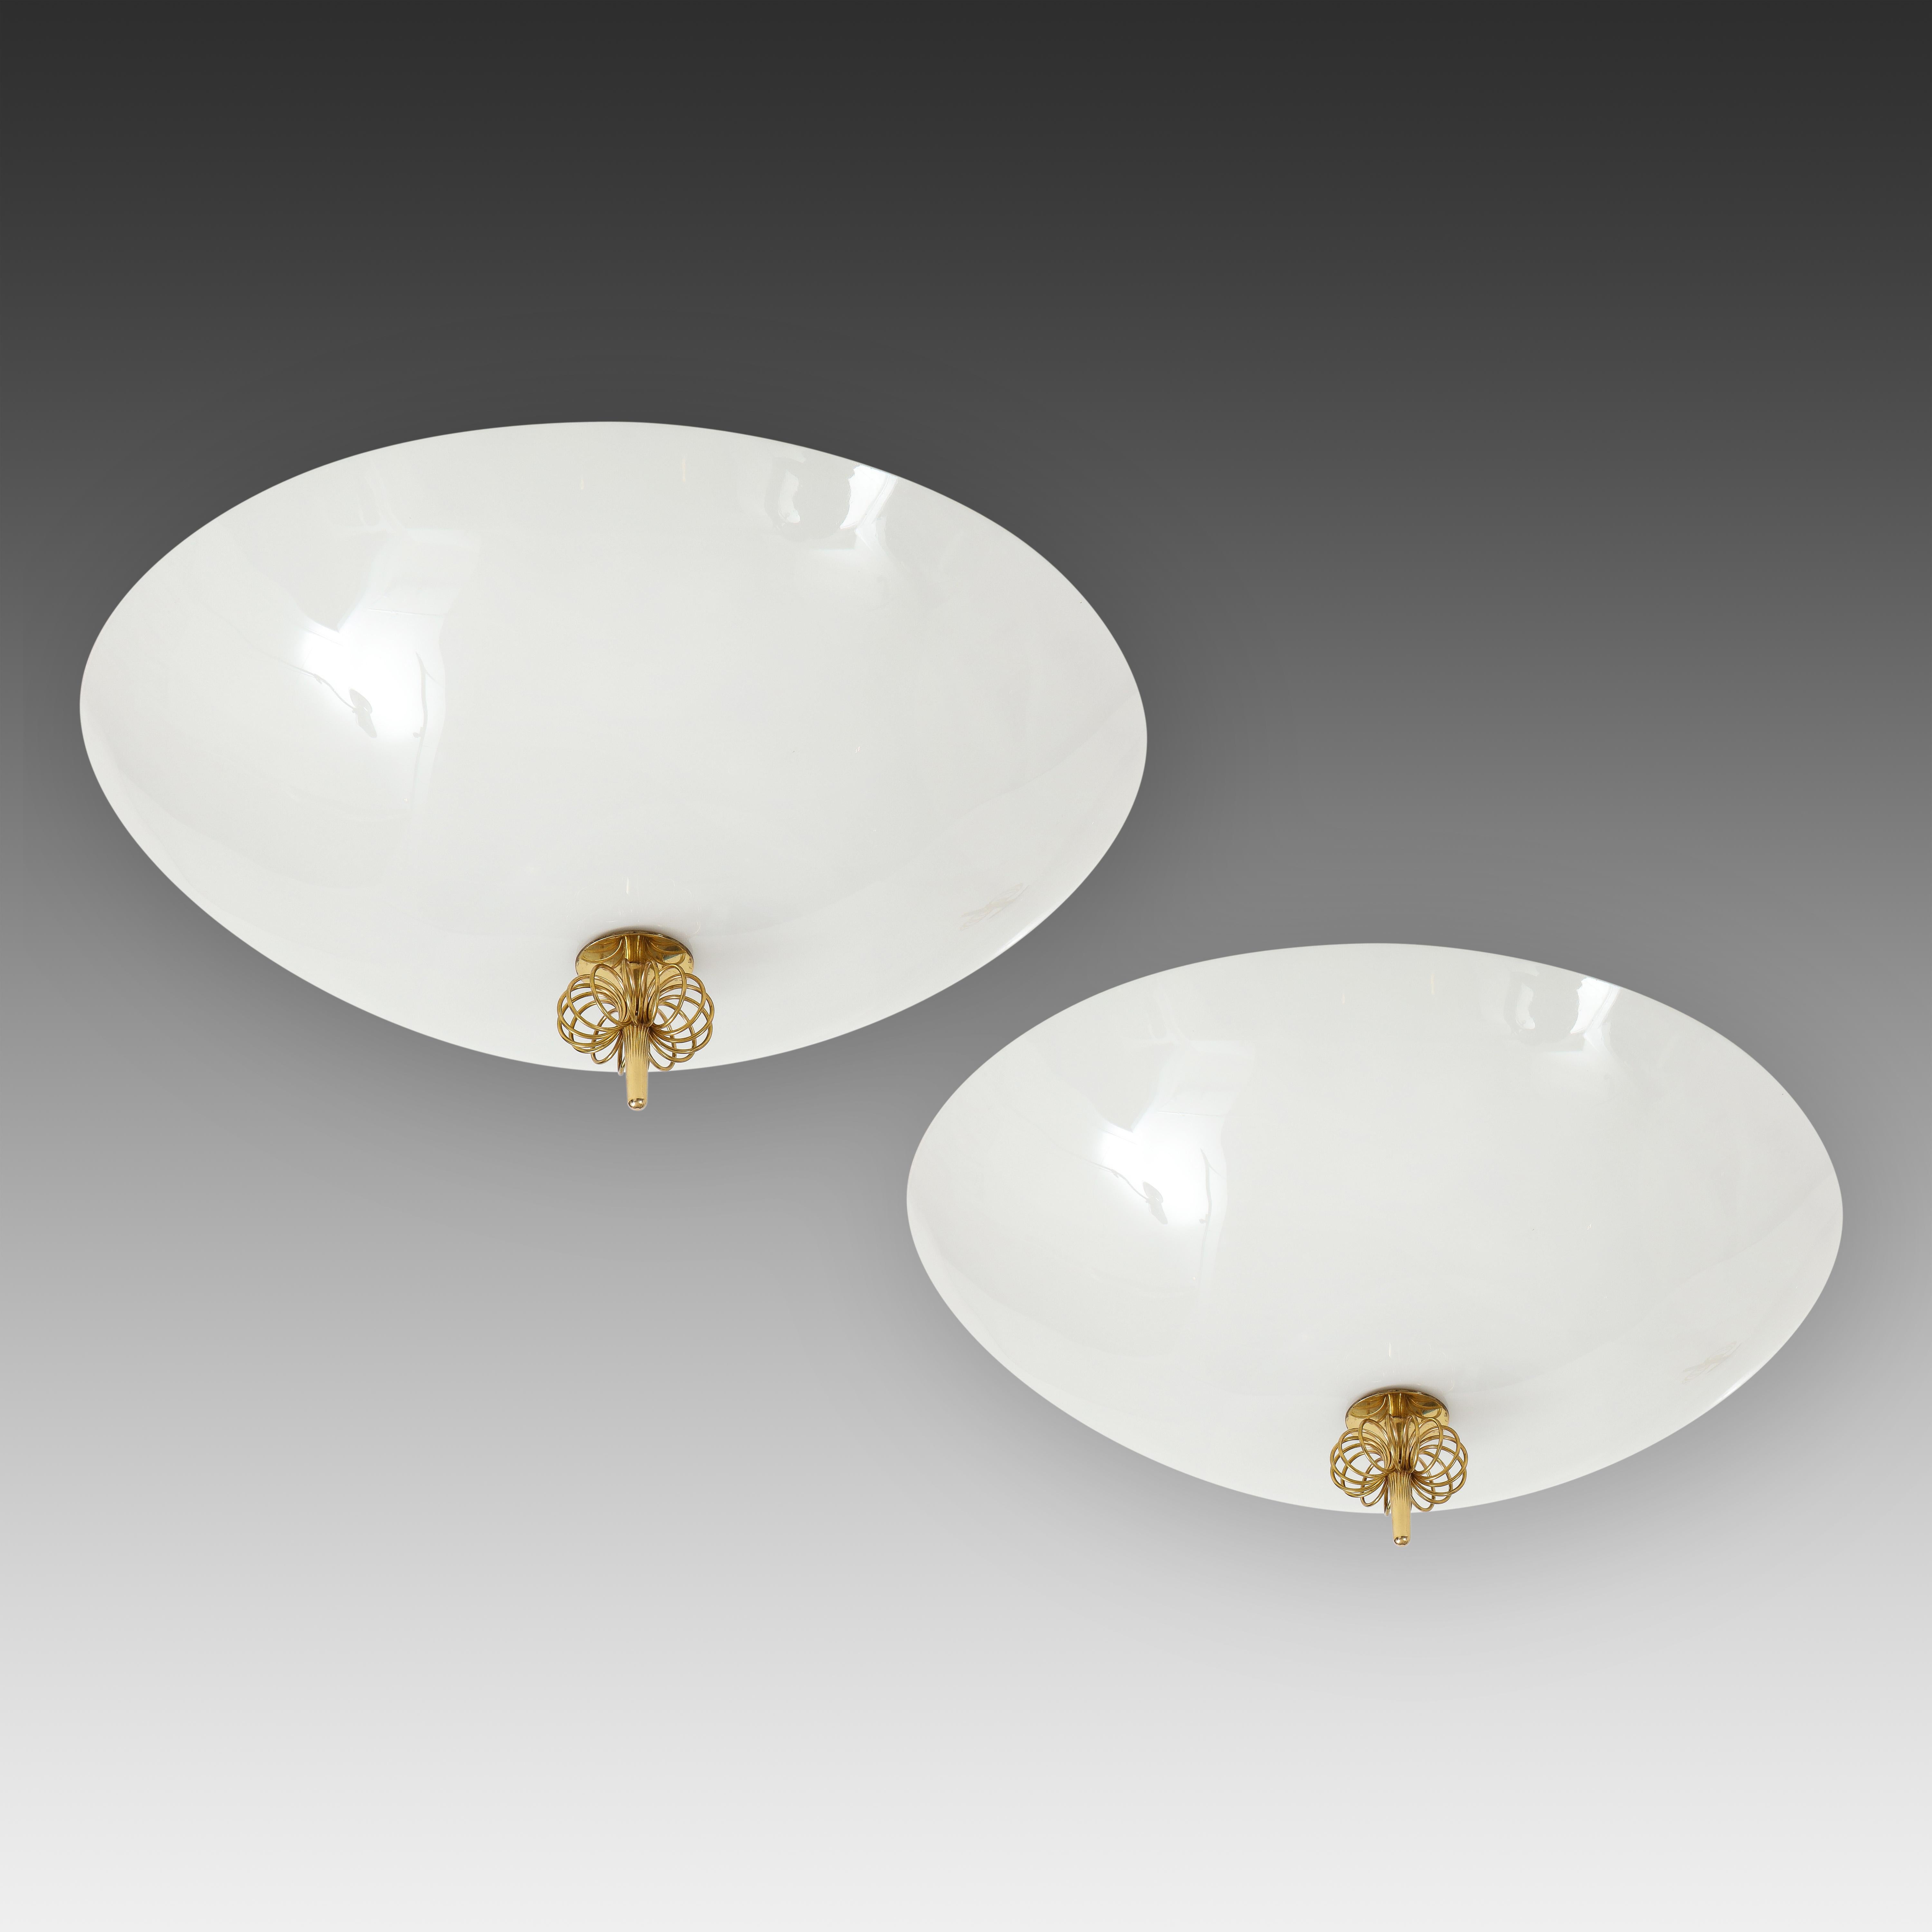 Paavo Tynell for Idman Oy elegant pair of flush mount ceiling lights with opaline glass dish shades with trademark central brass spiral decorations. Impressed with manufacturer's mark 